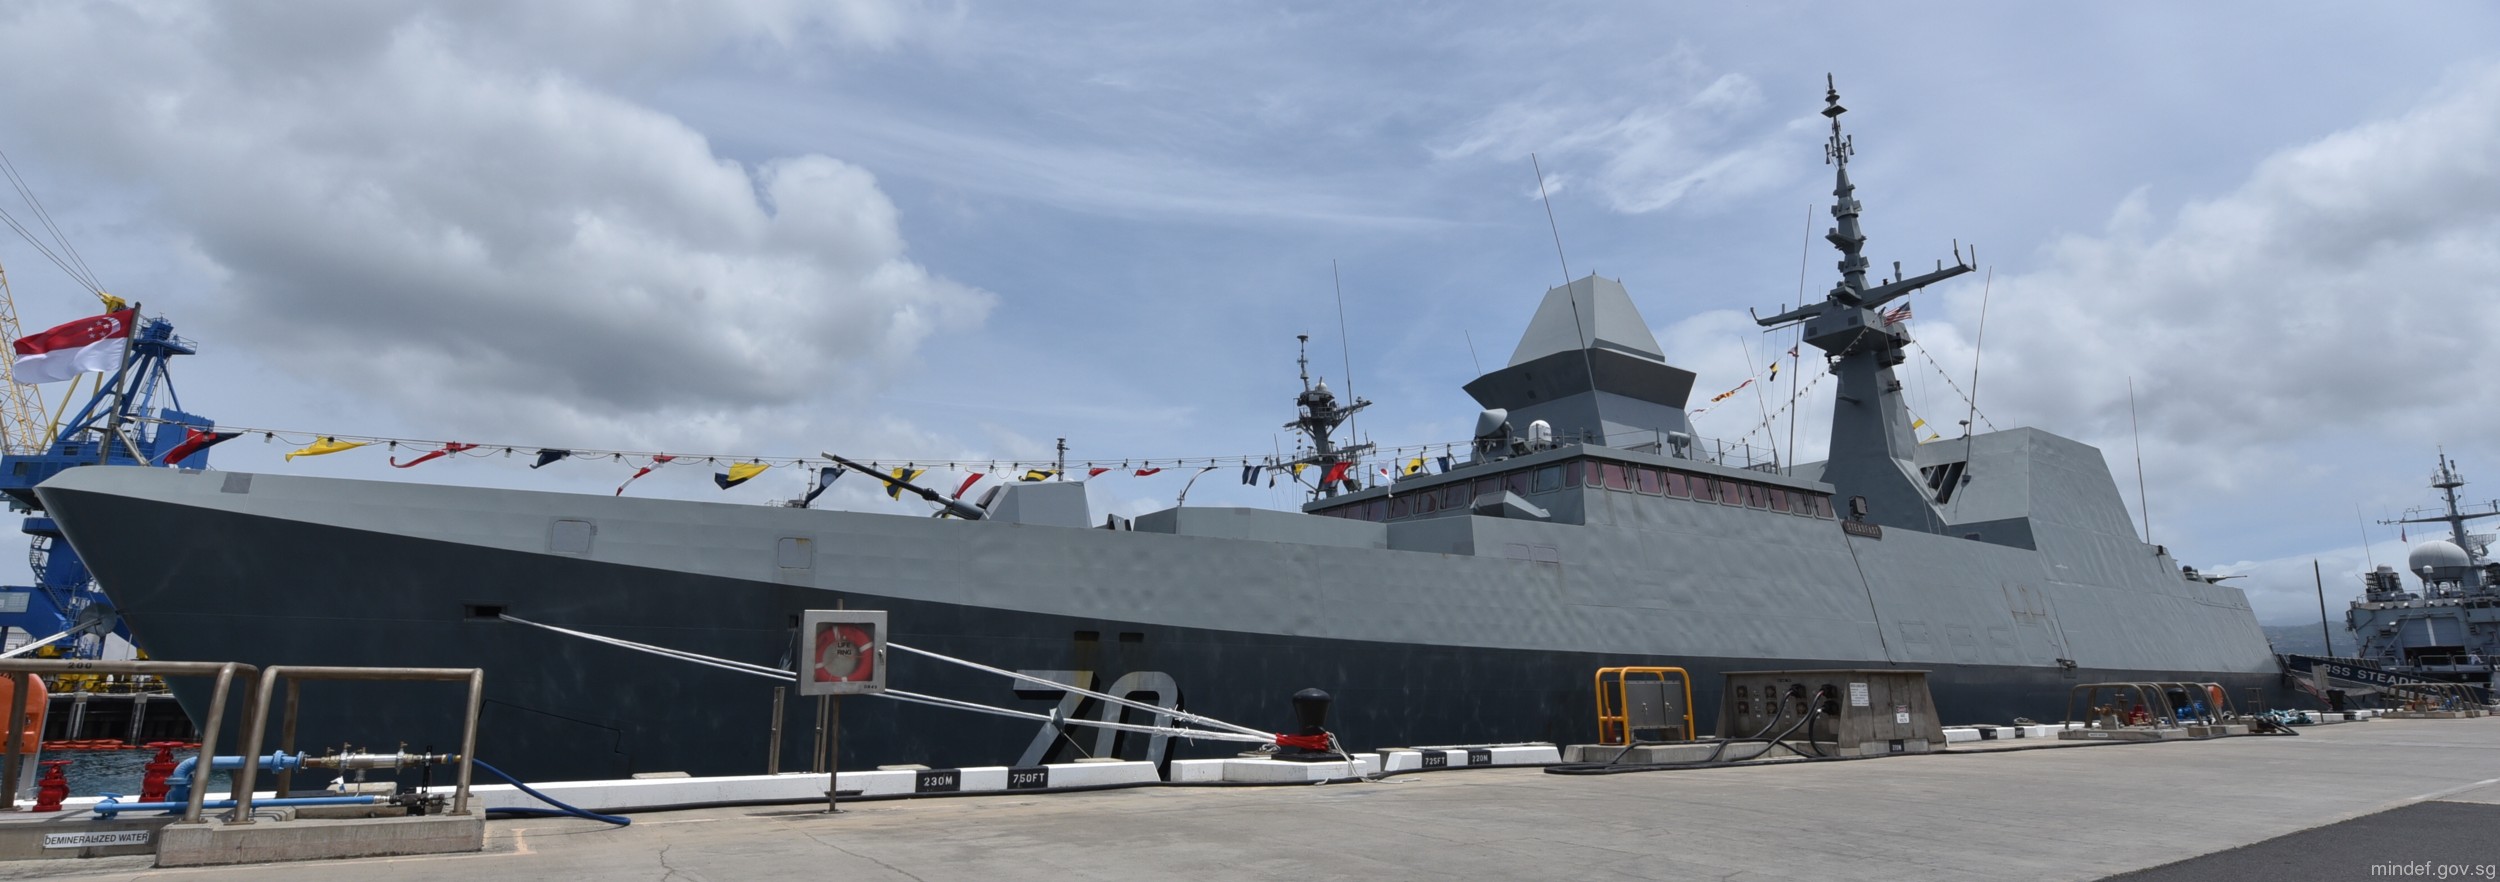 70 rss steadfast formidable class multi-mission missile frigate ffg republic singapore navy 04